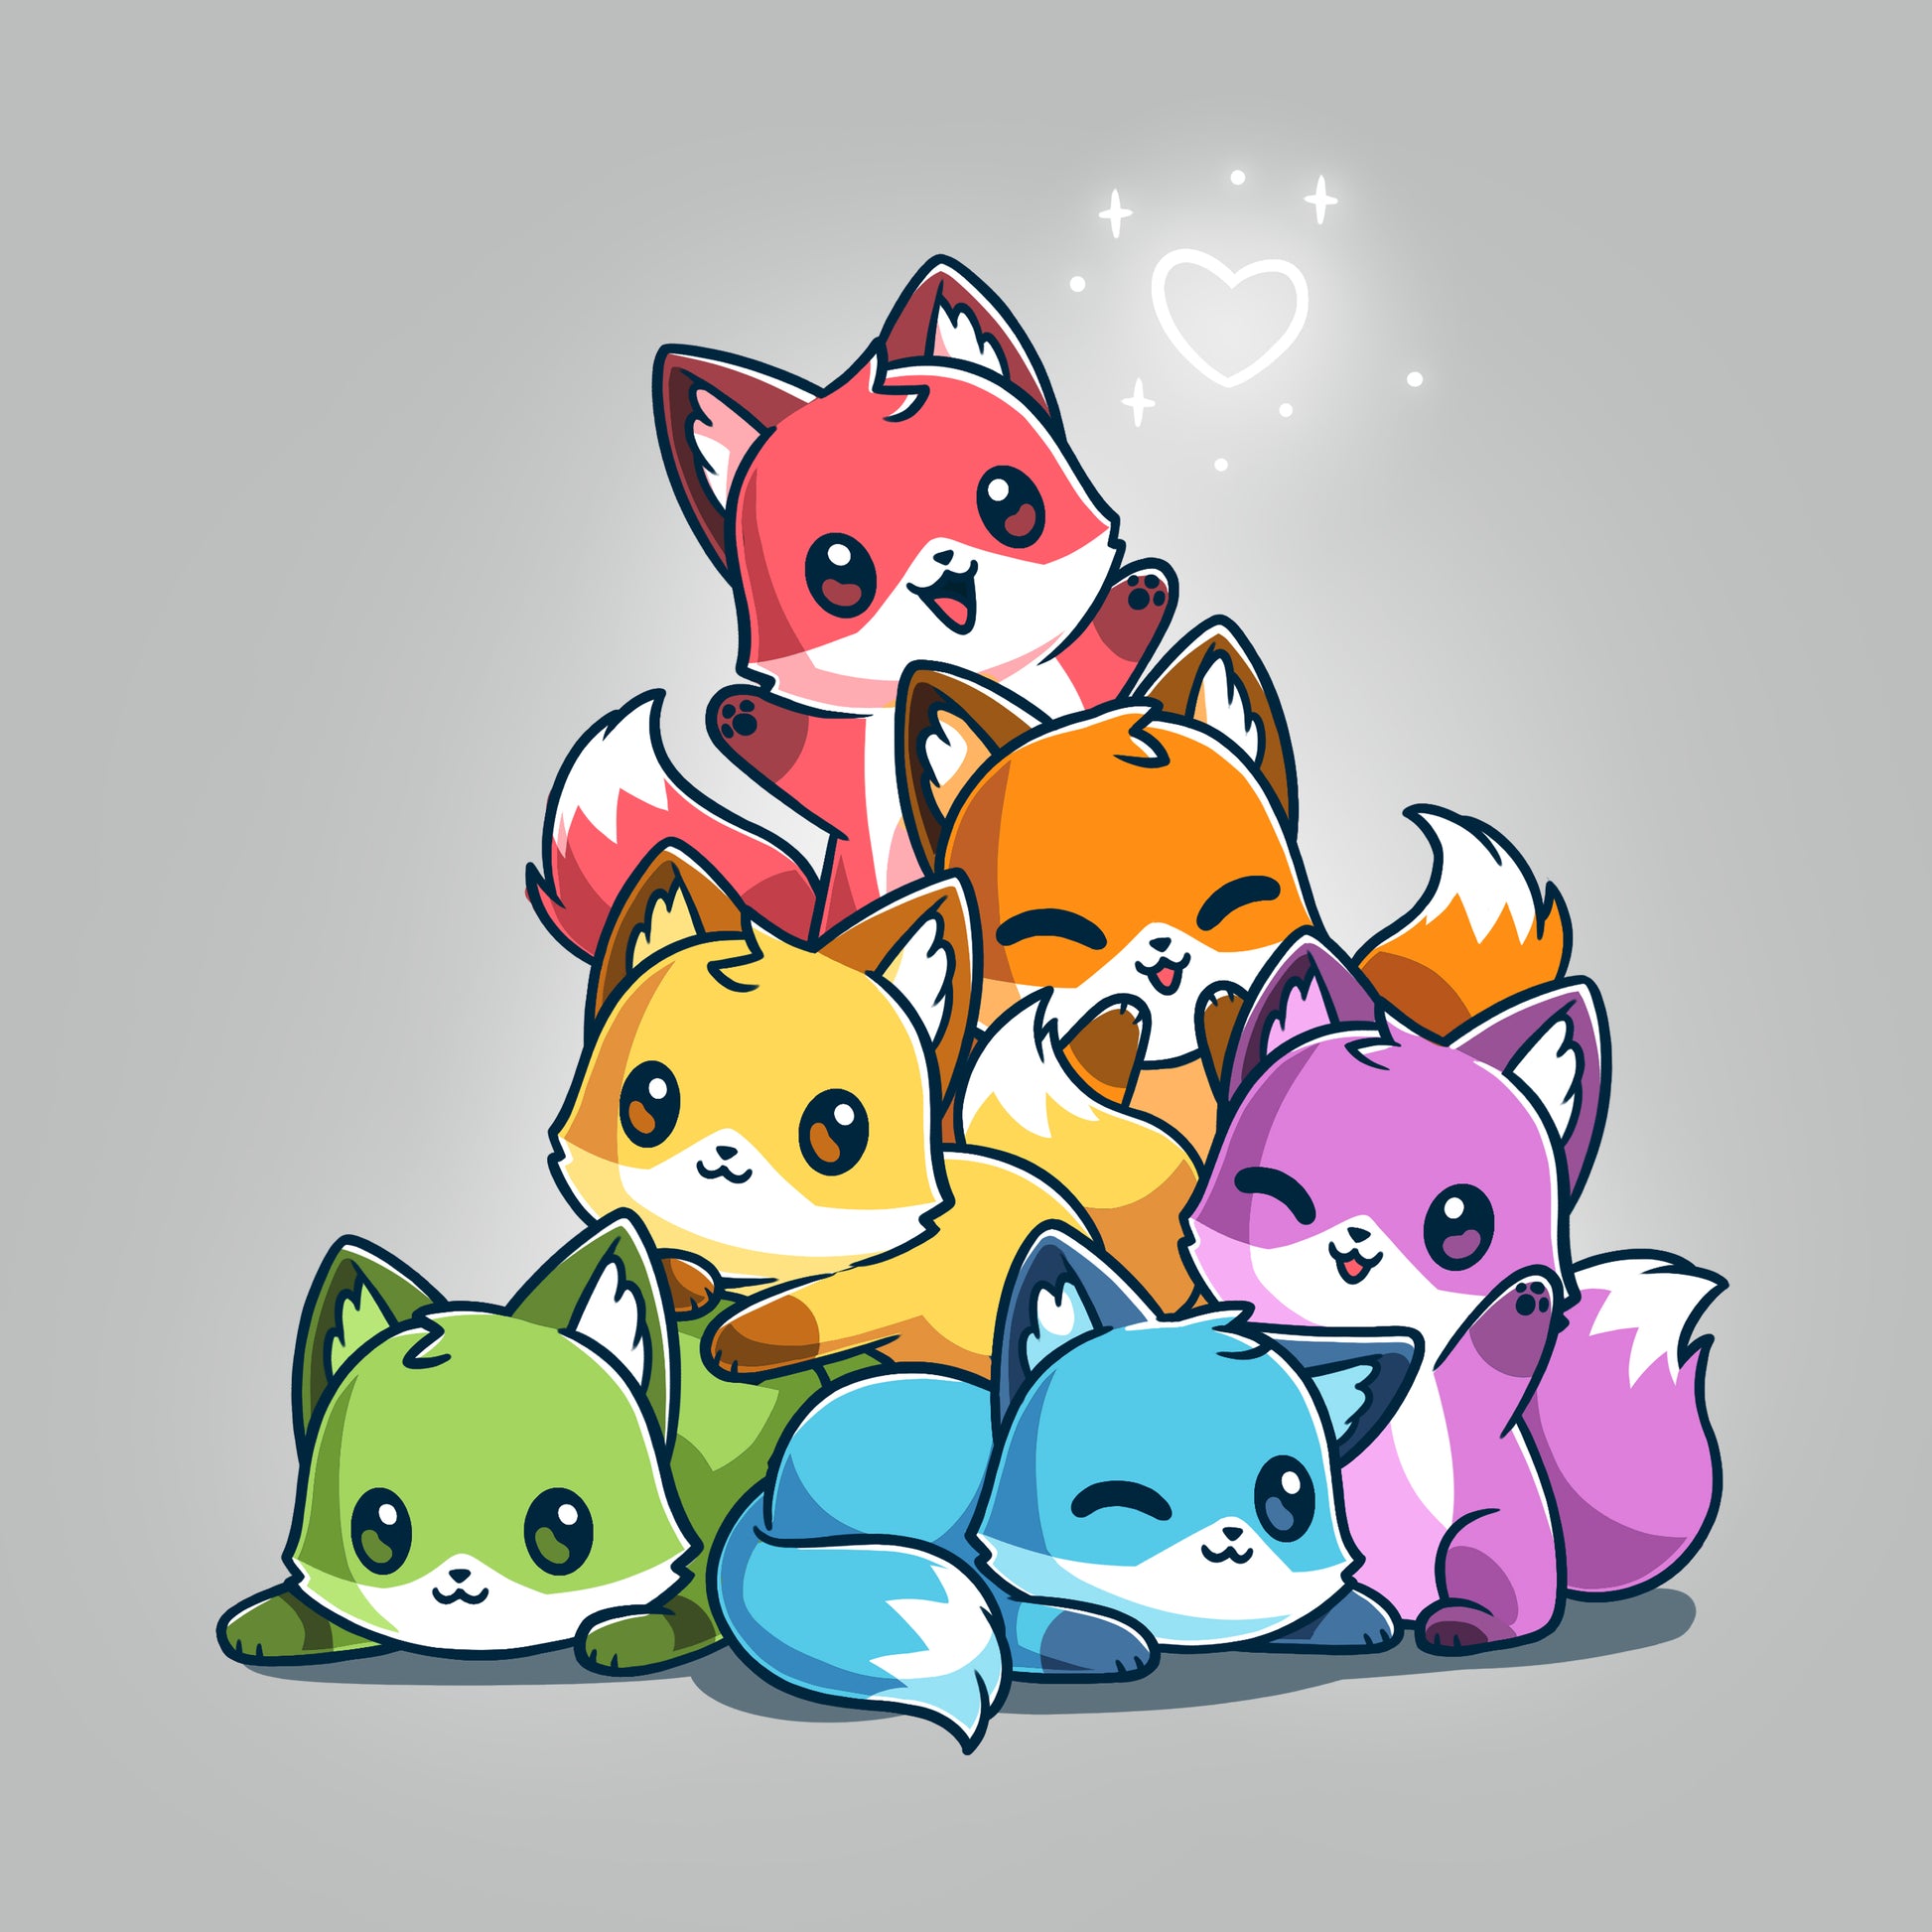 Illustration of six colorful cartoon foxes in various poses, arranged in a playful pyramid formation with a glowing heart shape above them. Background is a plain grey. This design is featured on the "Rainbow Foxes" super soft ringspun cotton T-shirt by monsterdigital, with a unisex fit, perfect for anyone who loves colorful foxes tees.